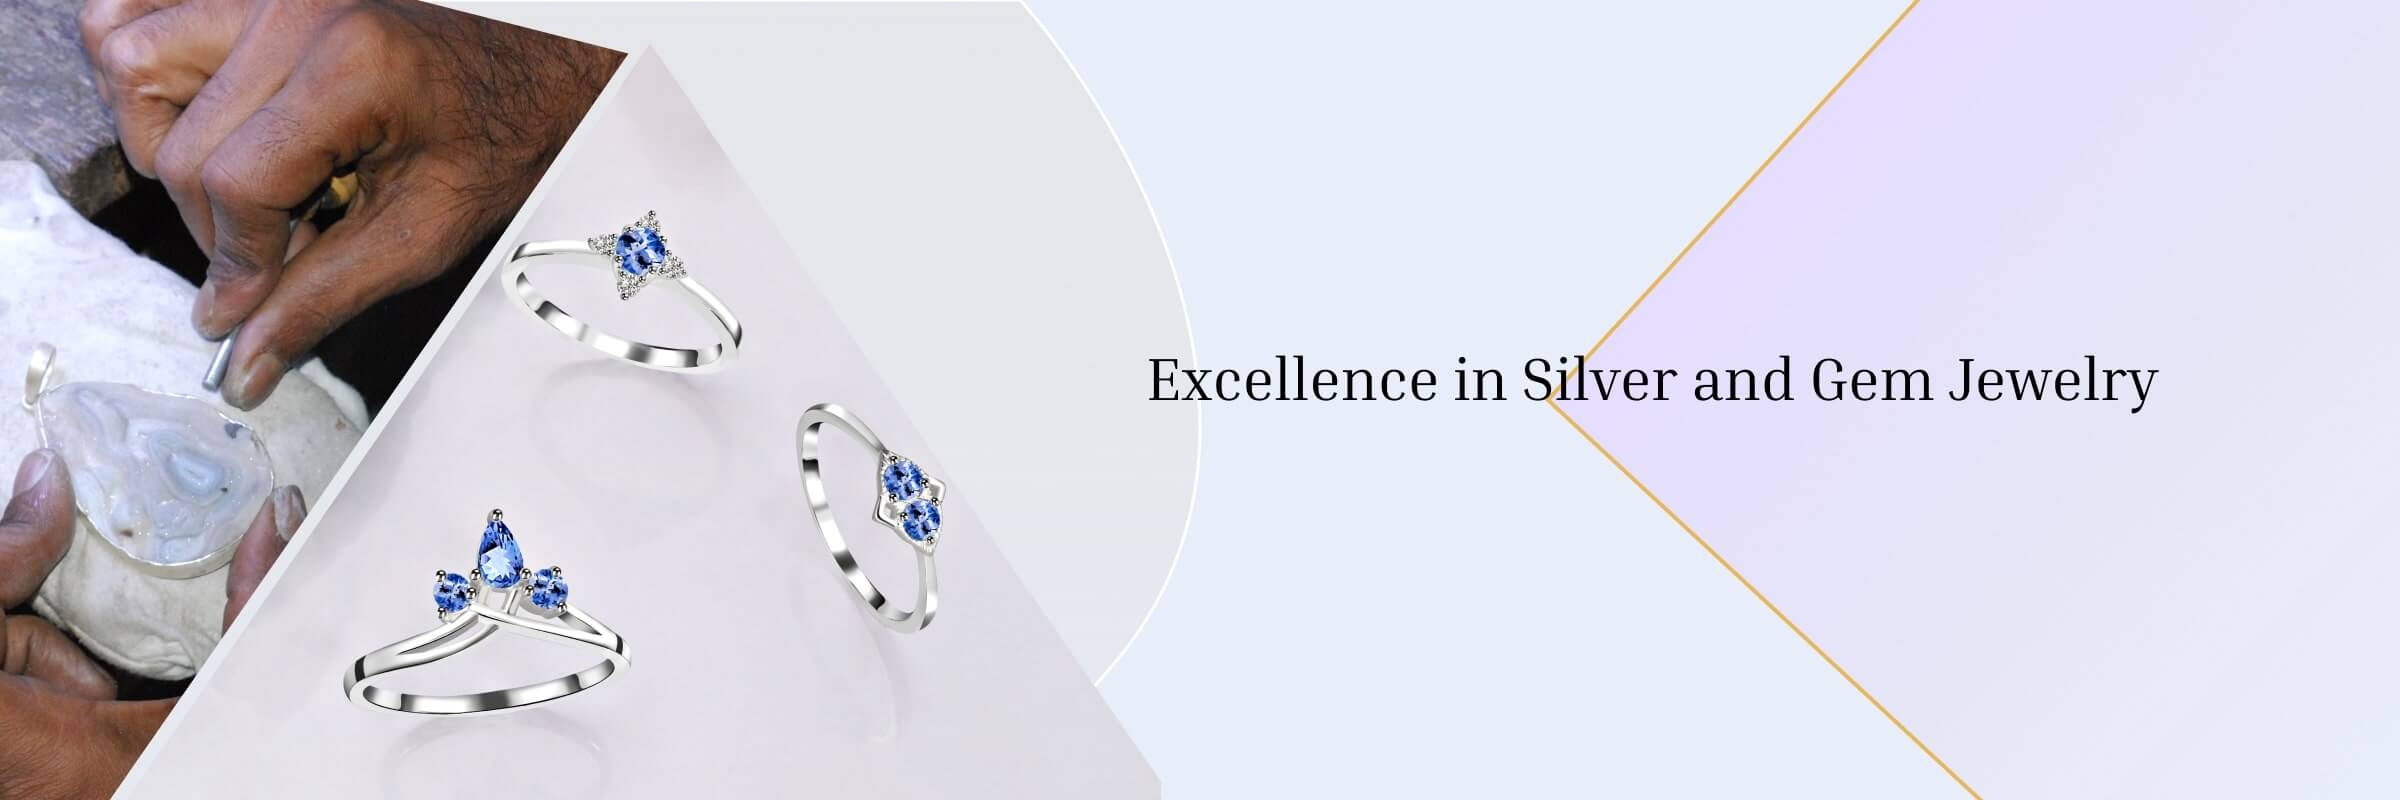 Proficiency in Silver and Gemstone Jewelry